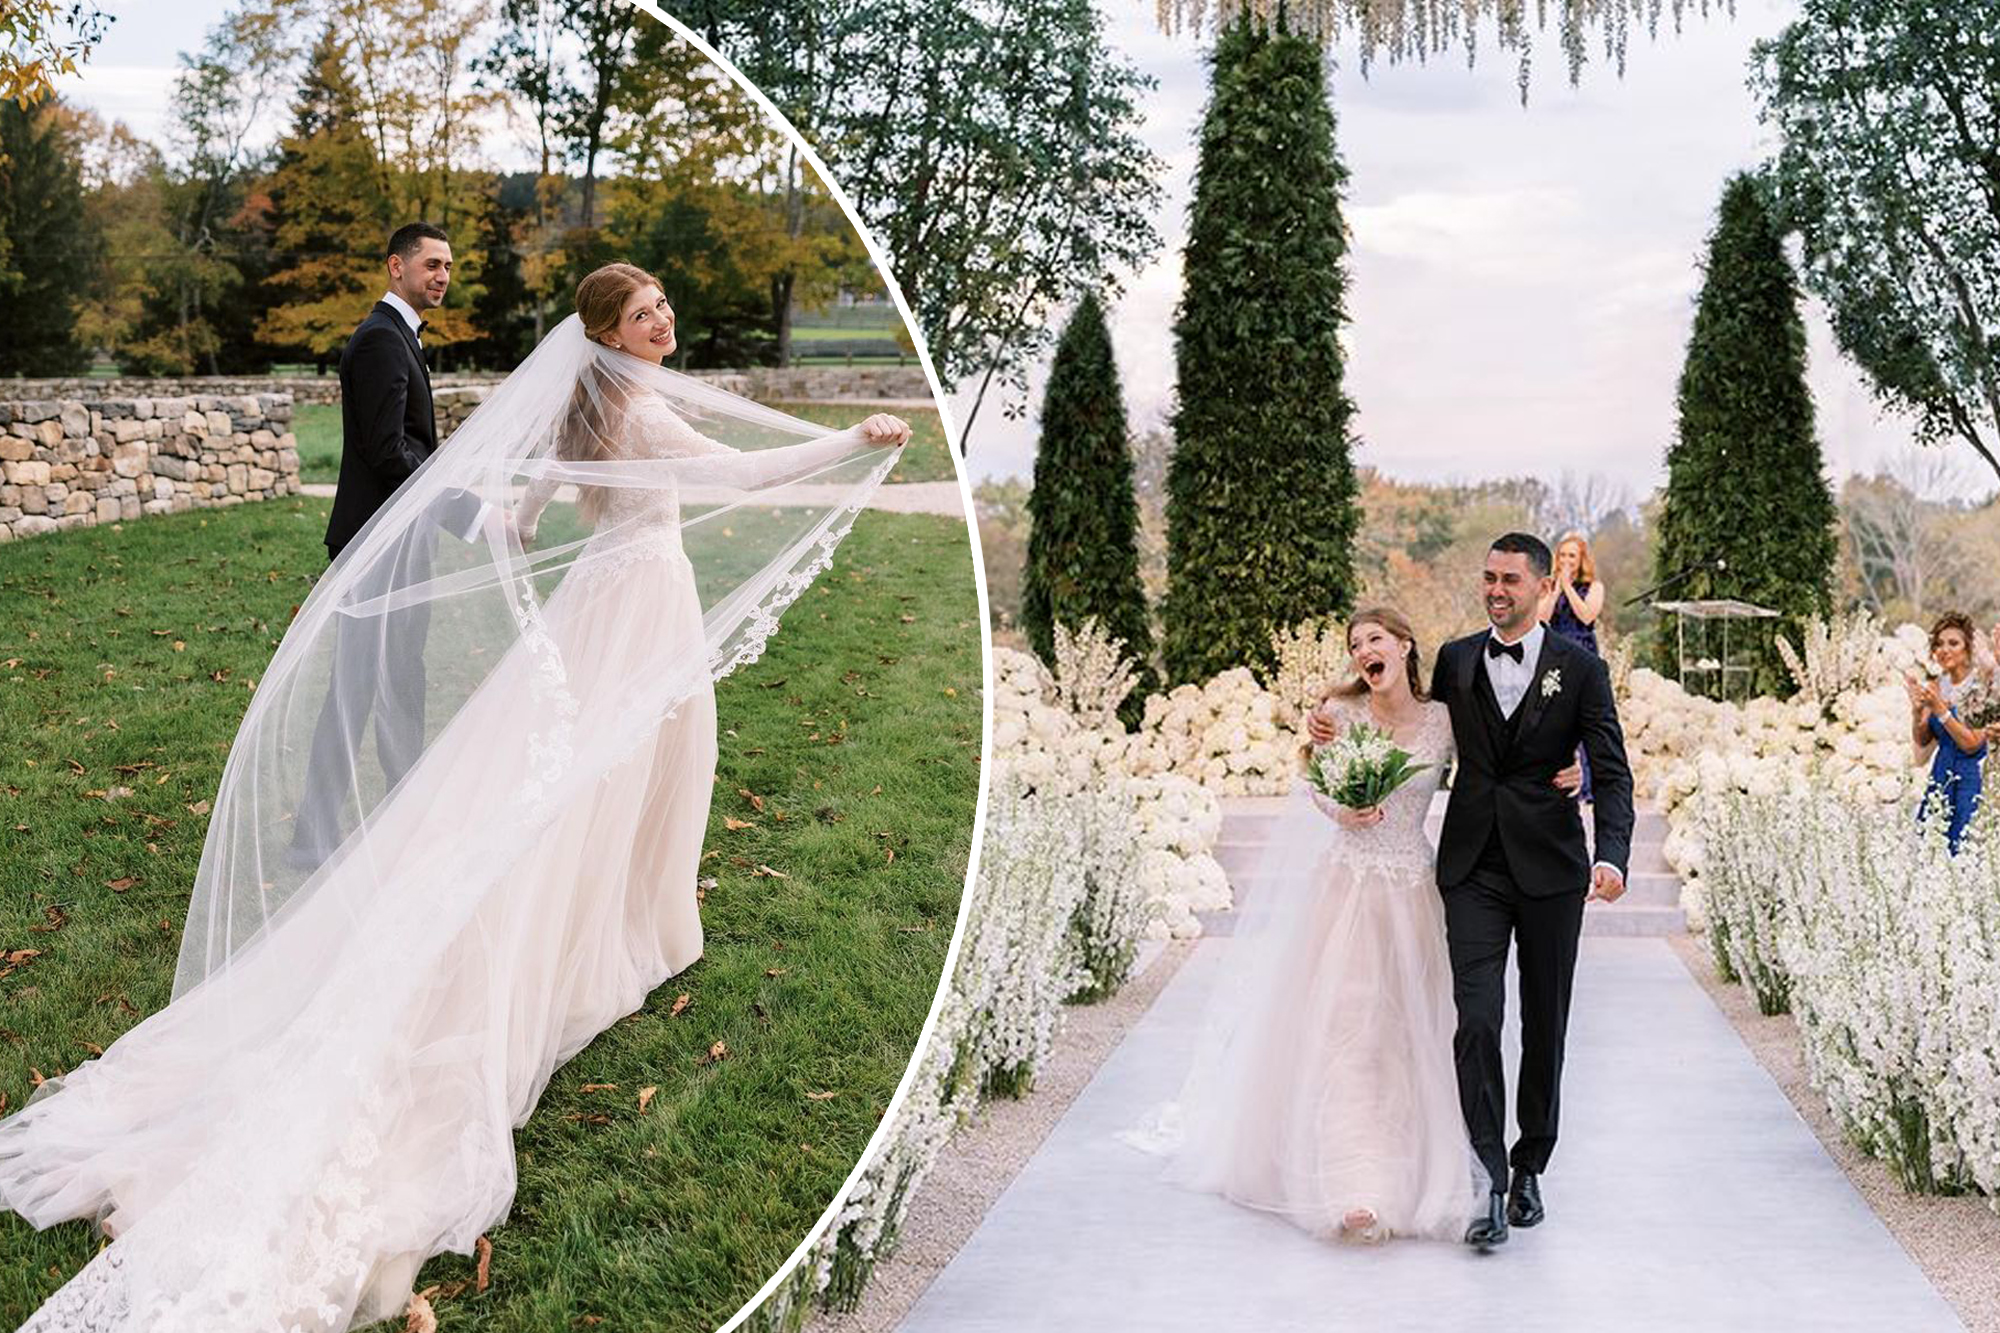 Bill gates' daughter wears a french lace wedding dress designed by vera wang fashion house